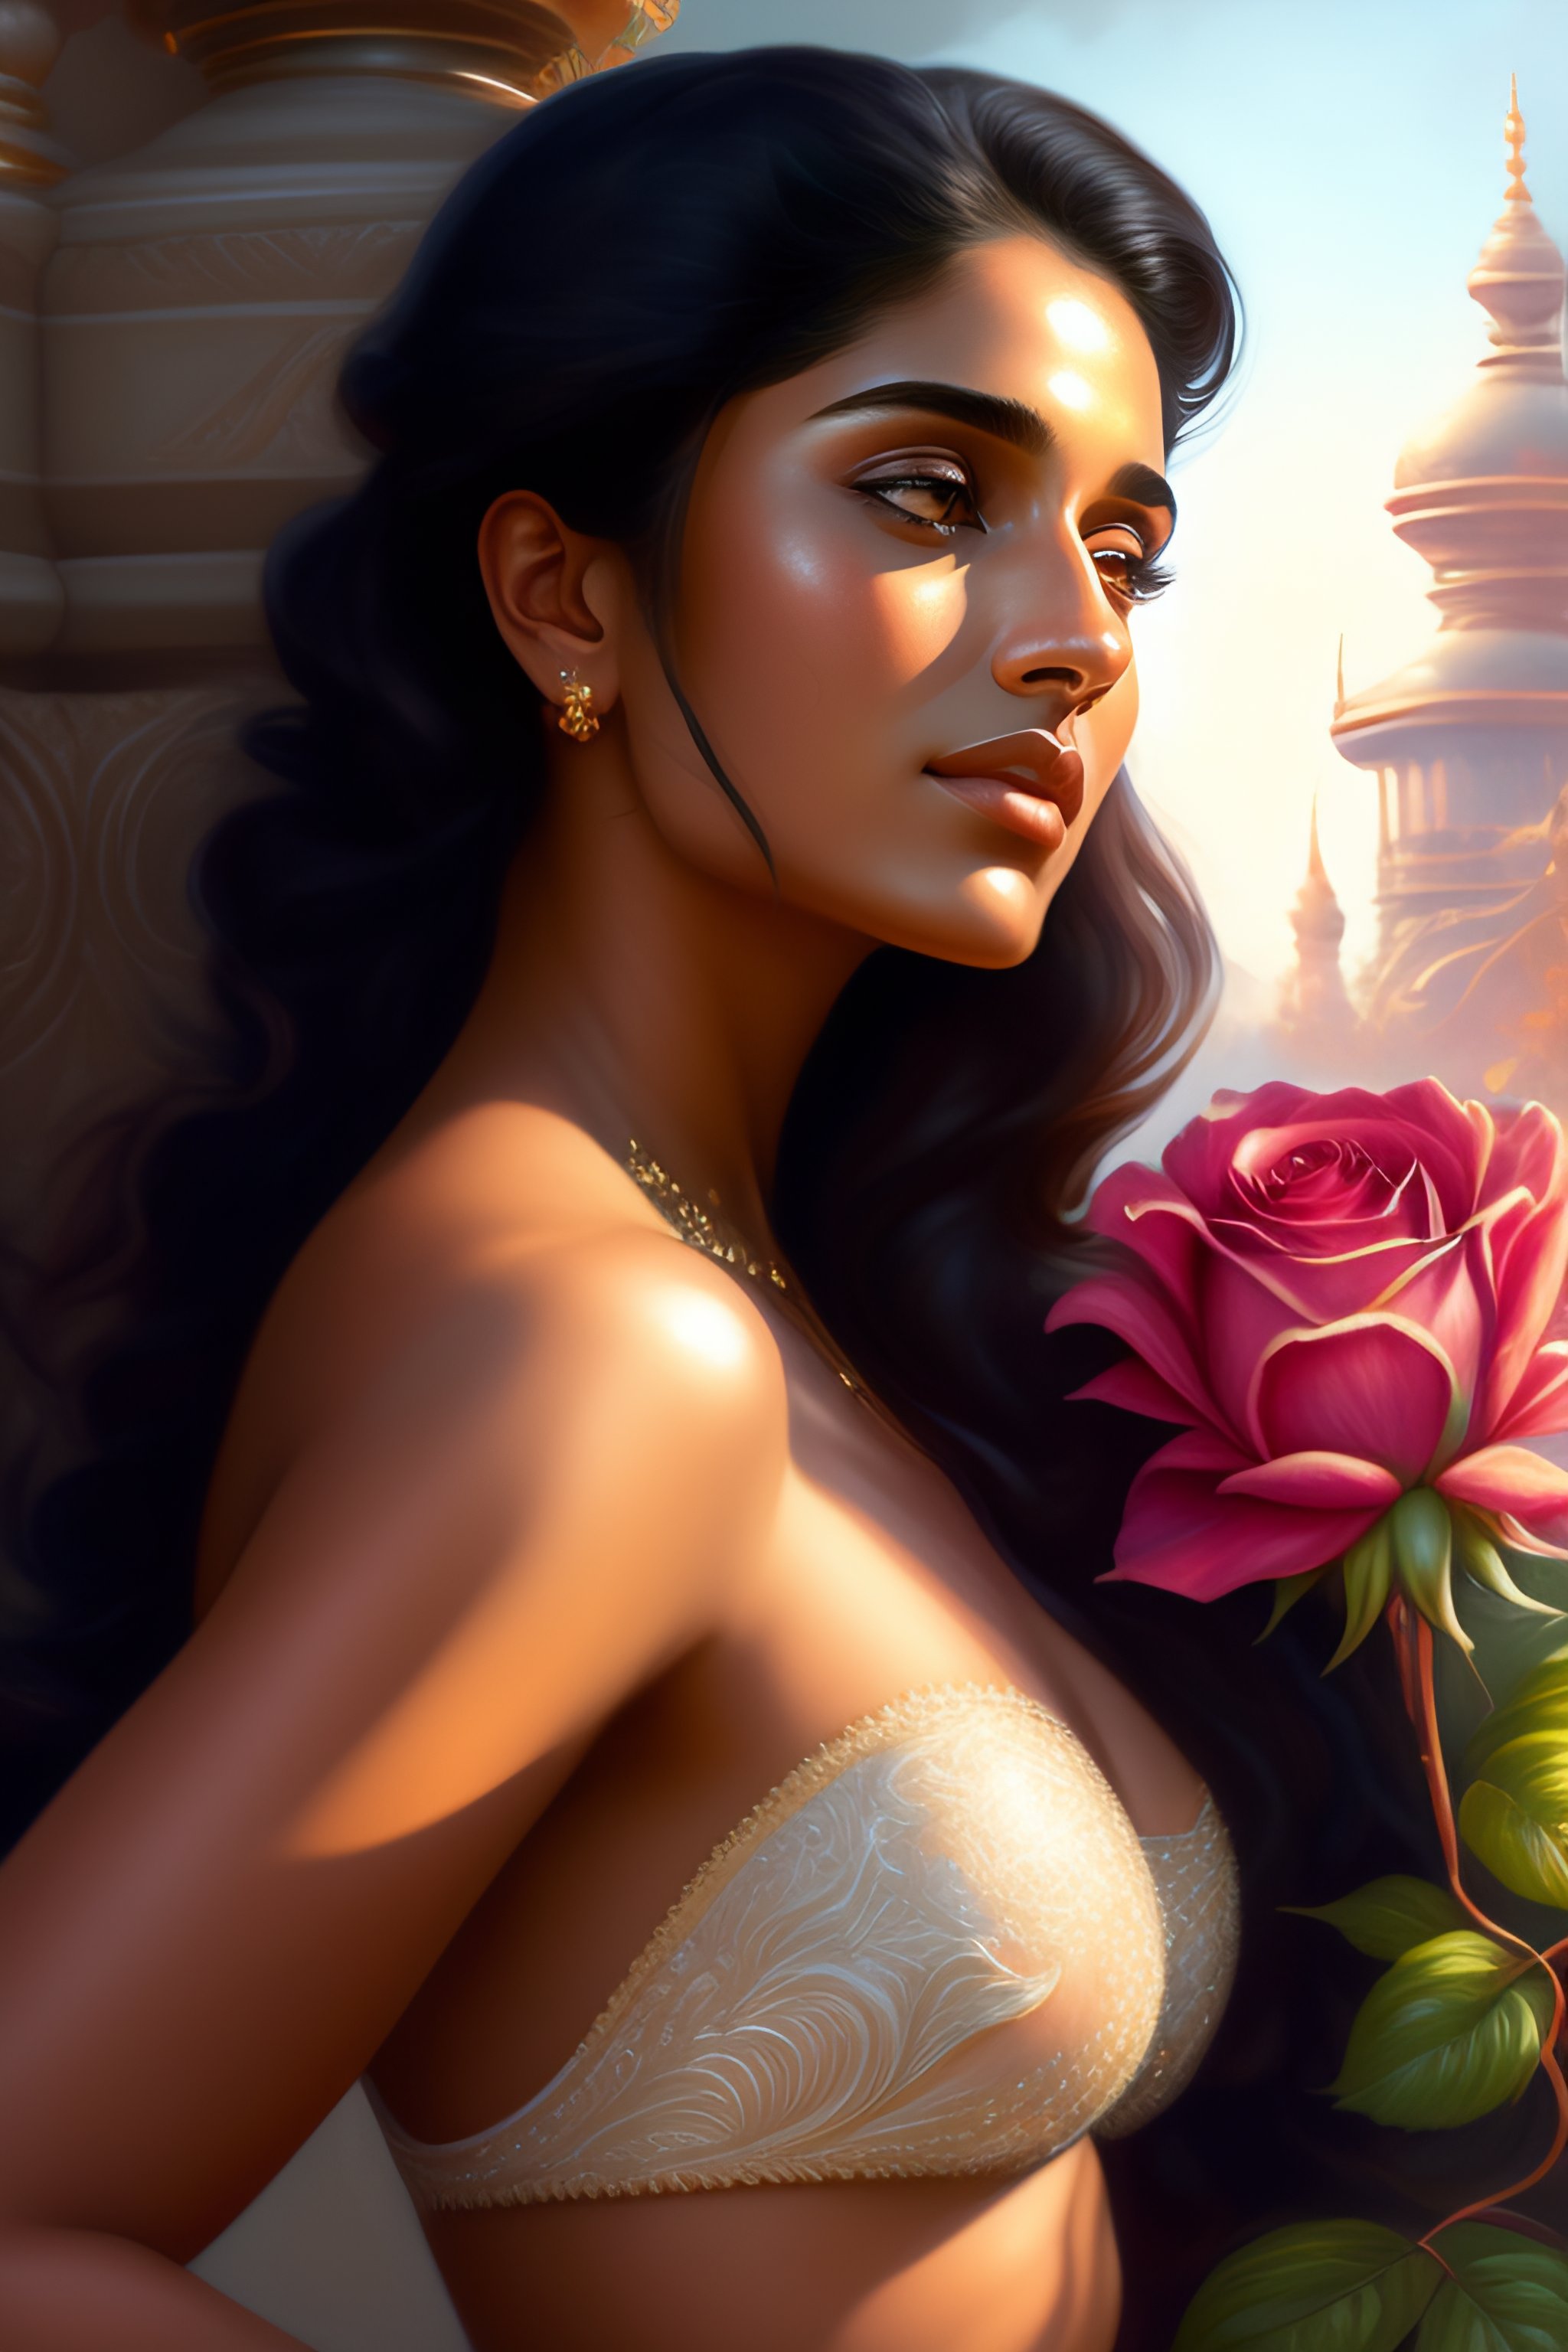 Lexica - Spanish woman niveda thomas, smelling a flower, roses everywhere,  highly detailed, silver bra with golden line design, large bra, with  golde